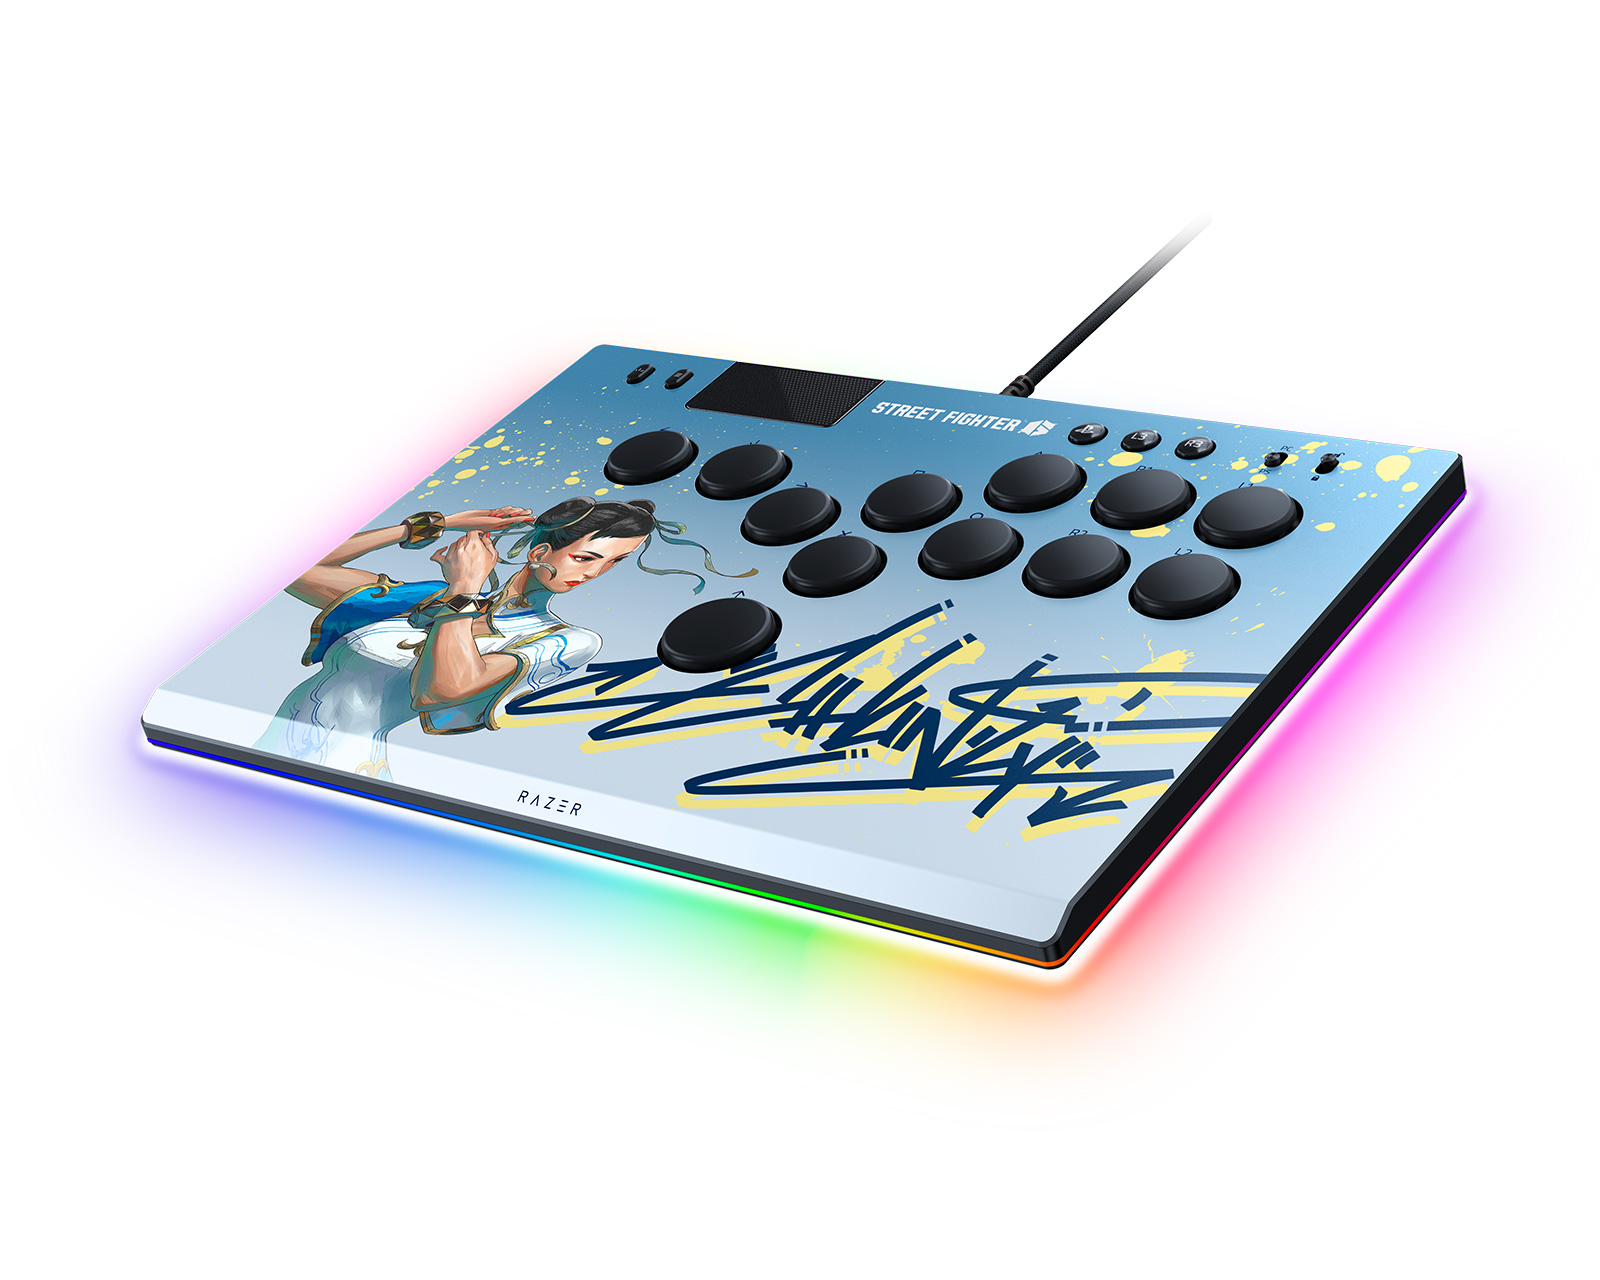 Create your own razer kitsune limited edition : r/fightsticks